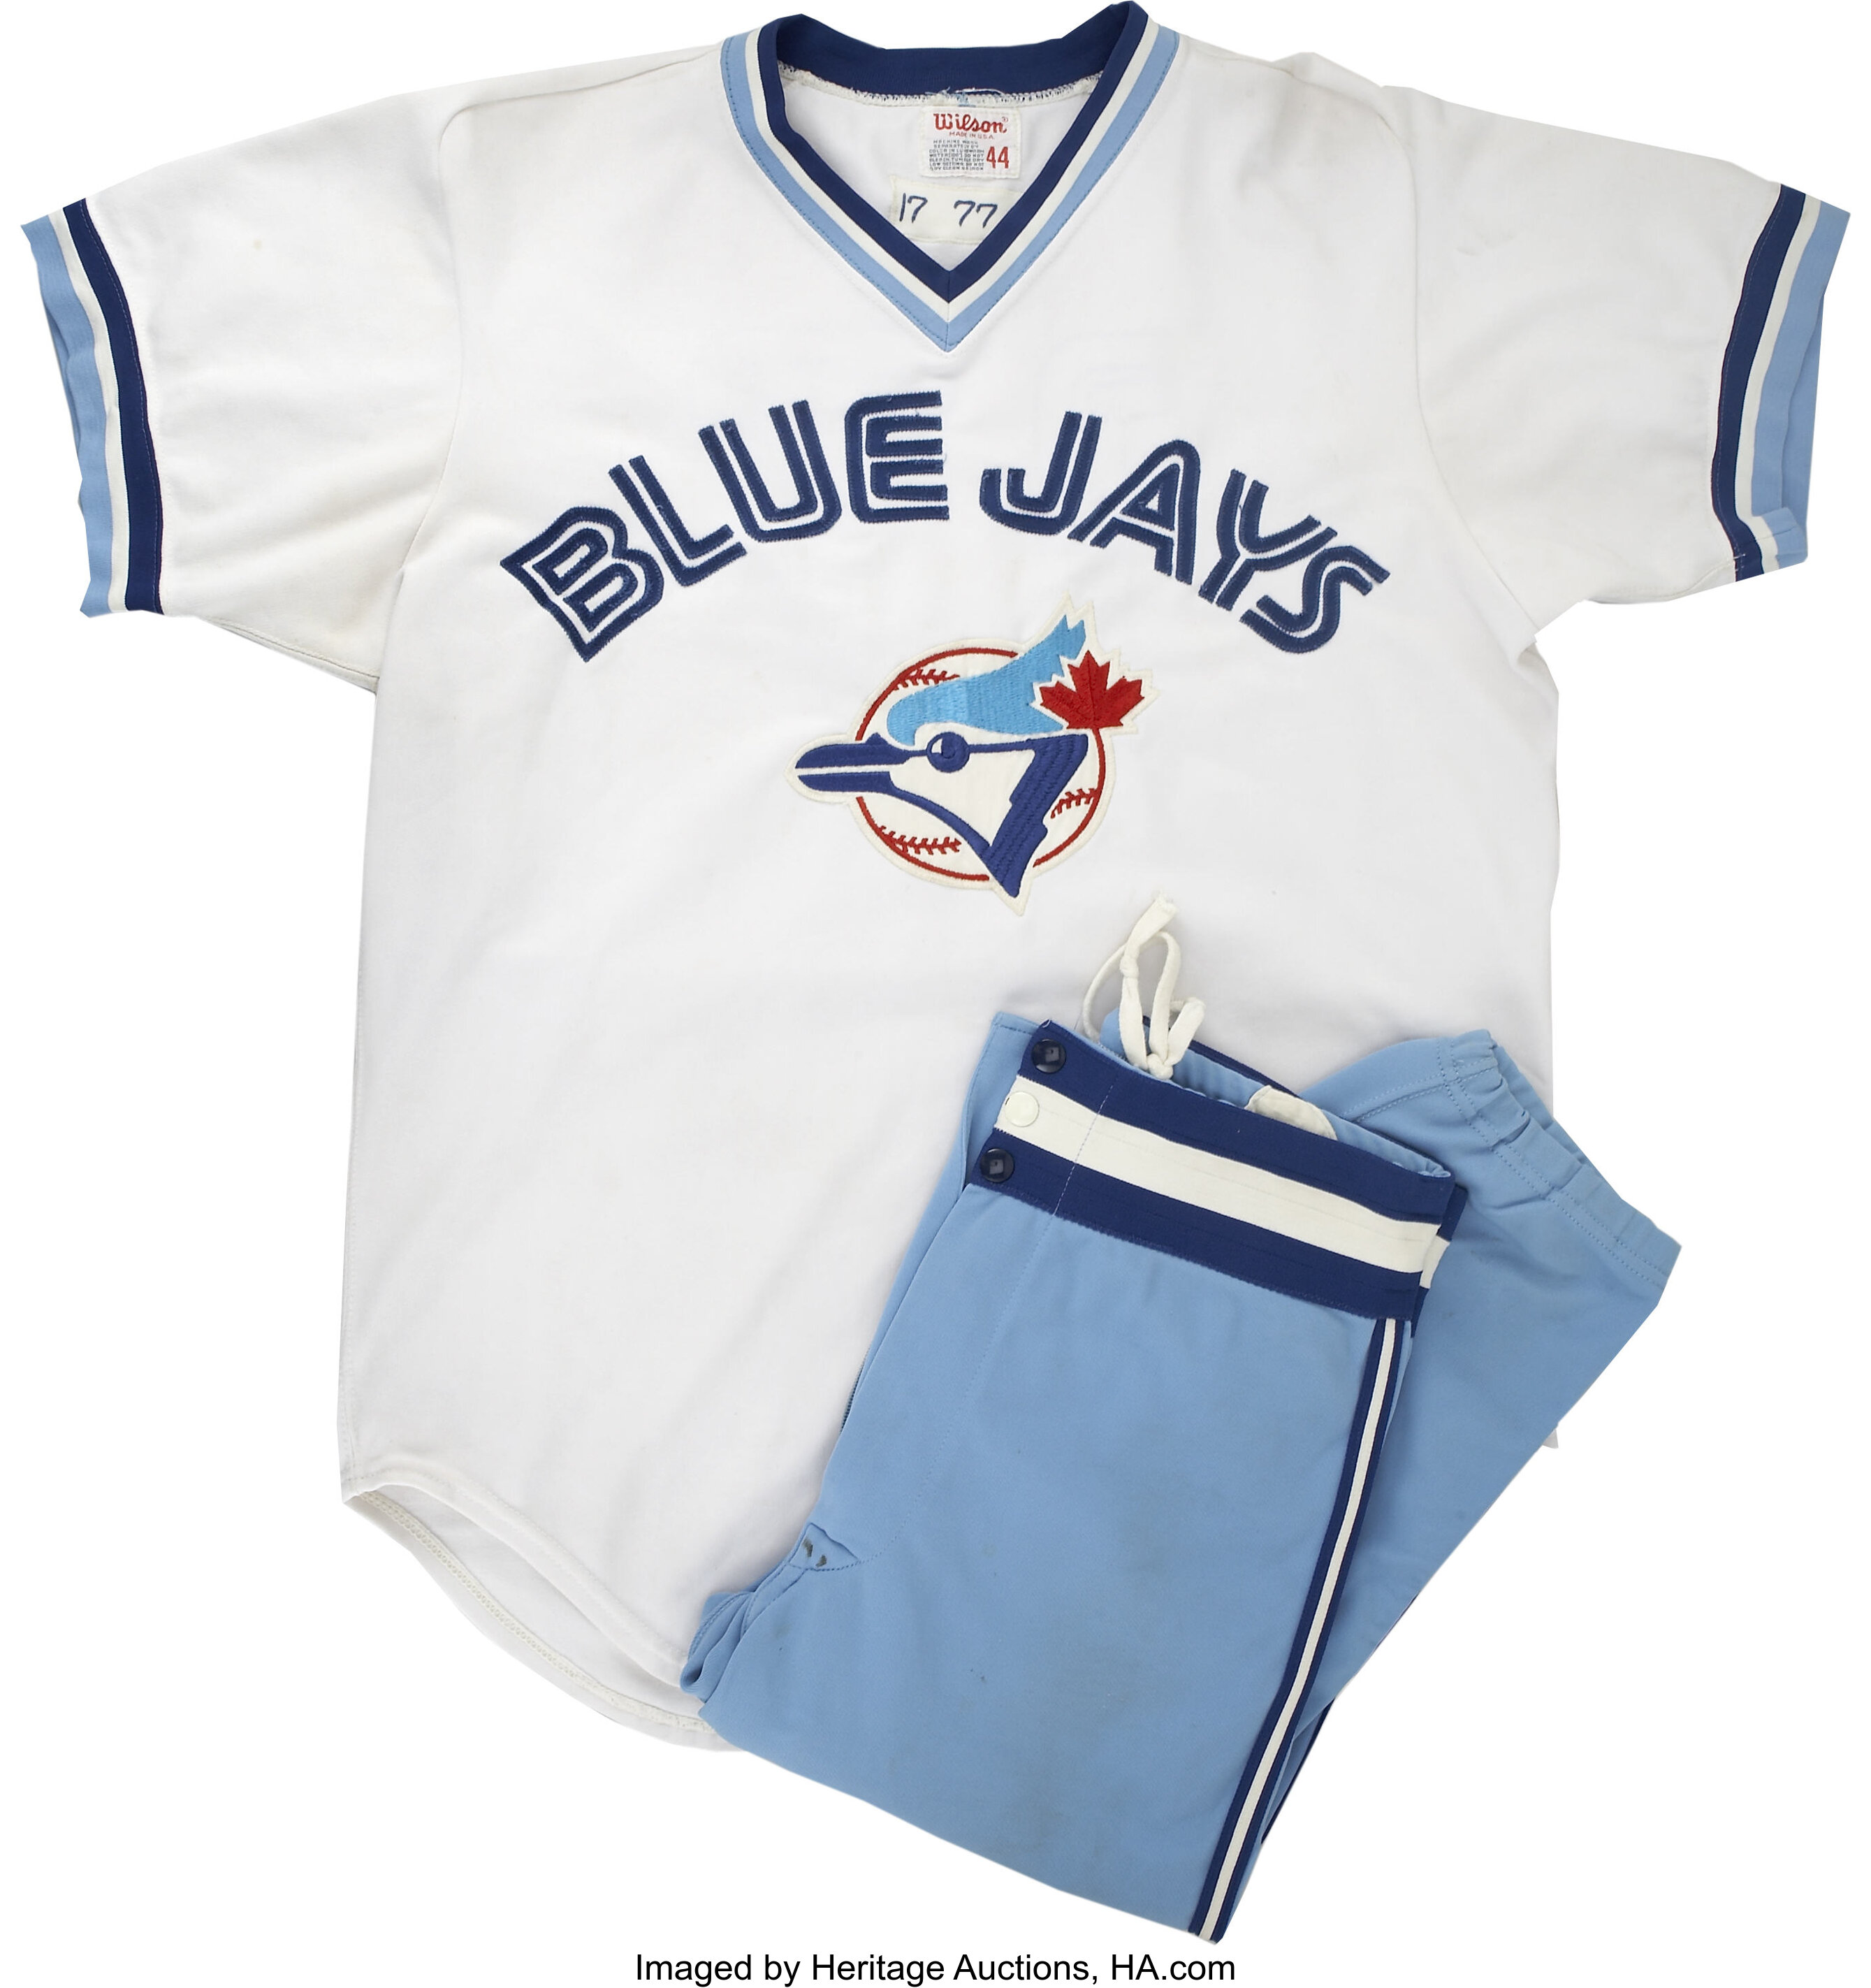 1977 Toronto Blue Jays Game Worn Jerseys and Pants. From the